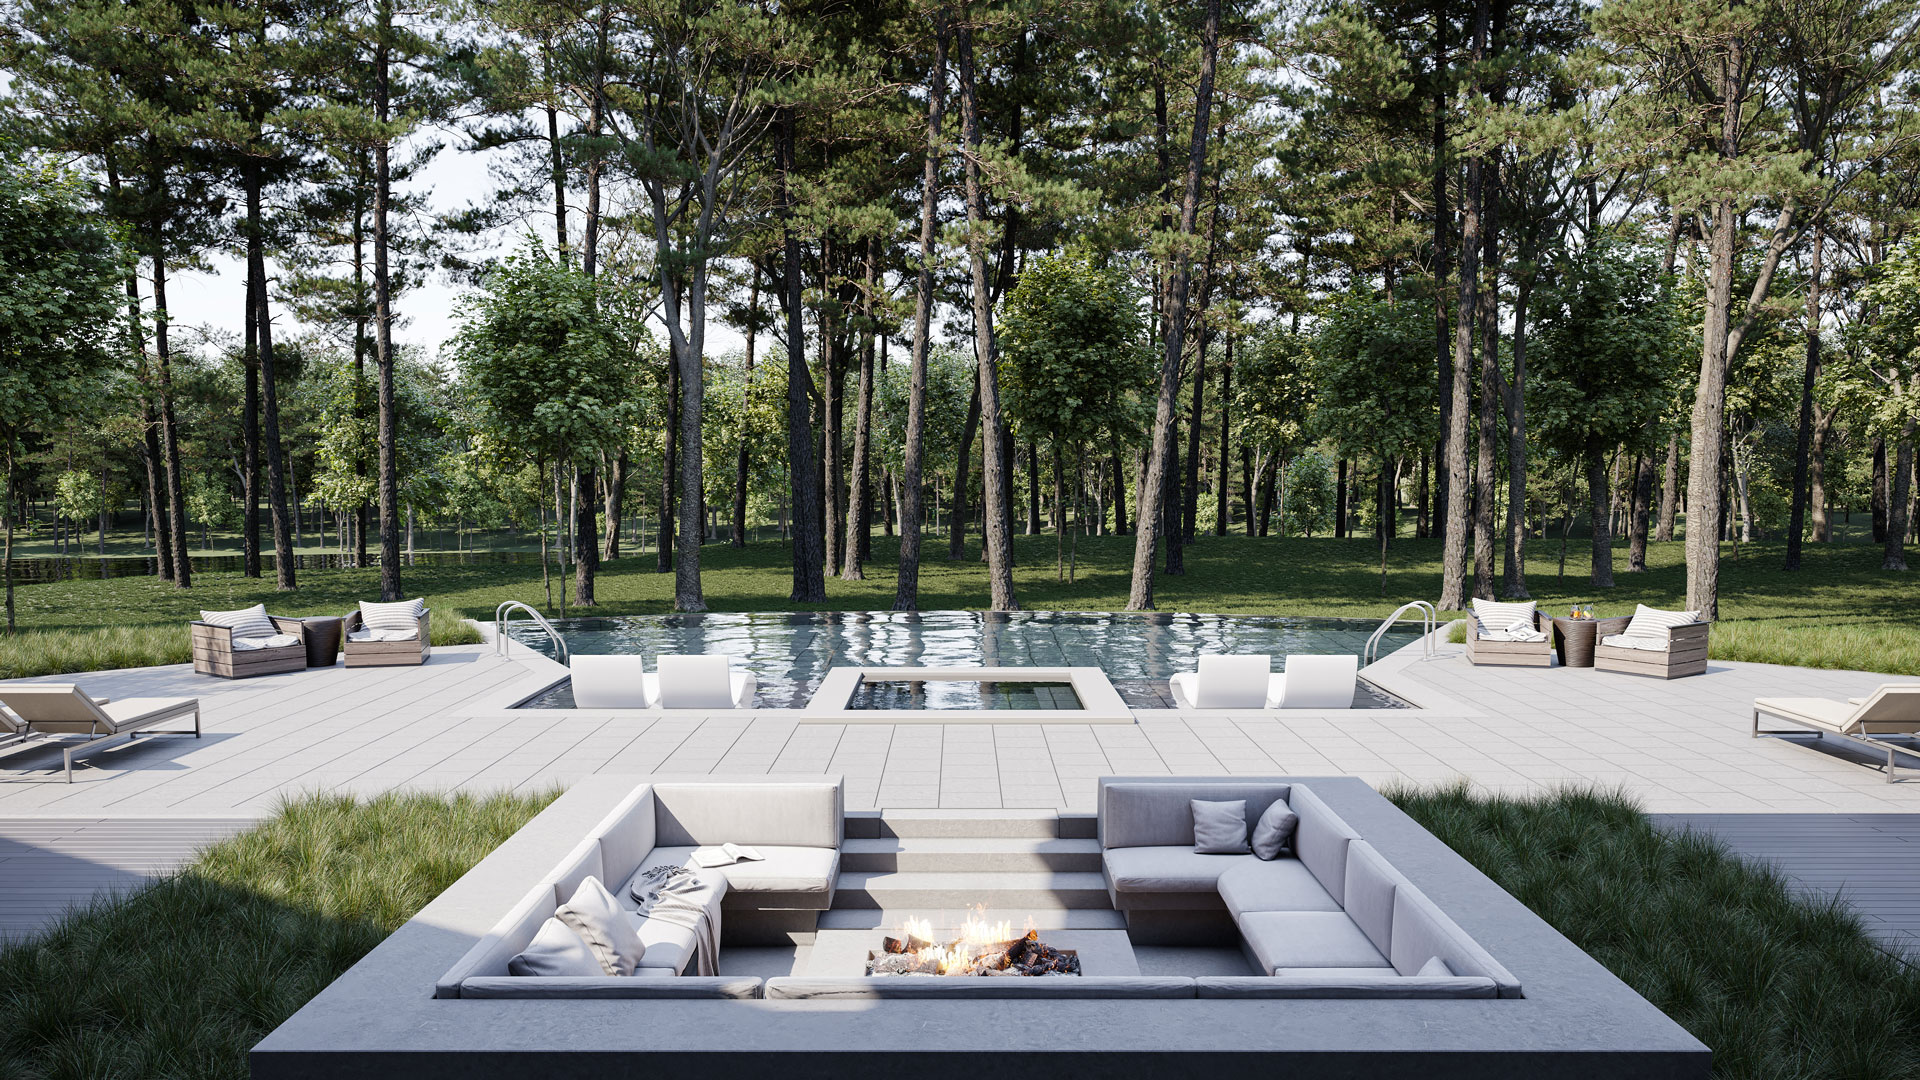 Exterior Renderings for a House in Georgia: Seating Area and Pool